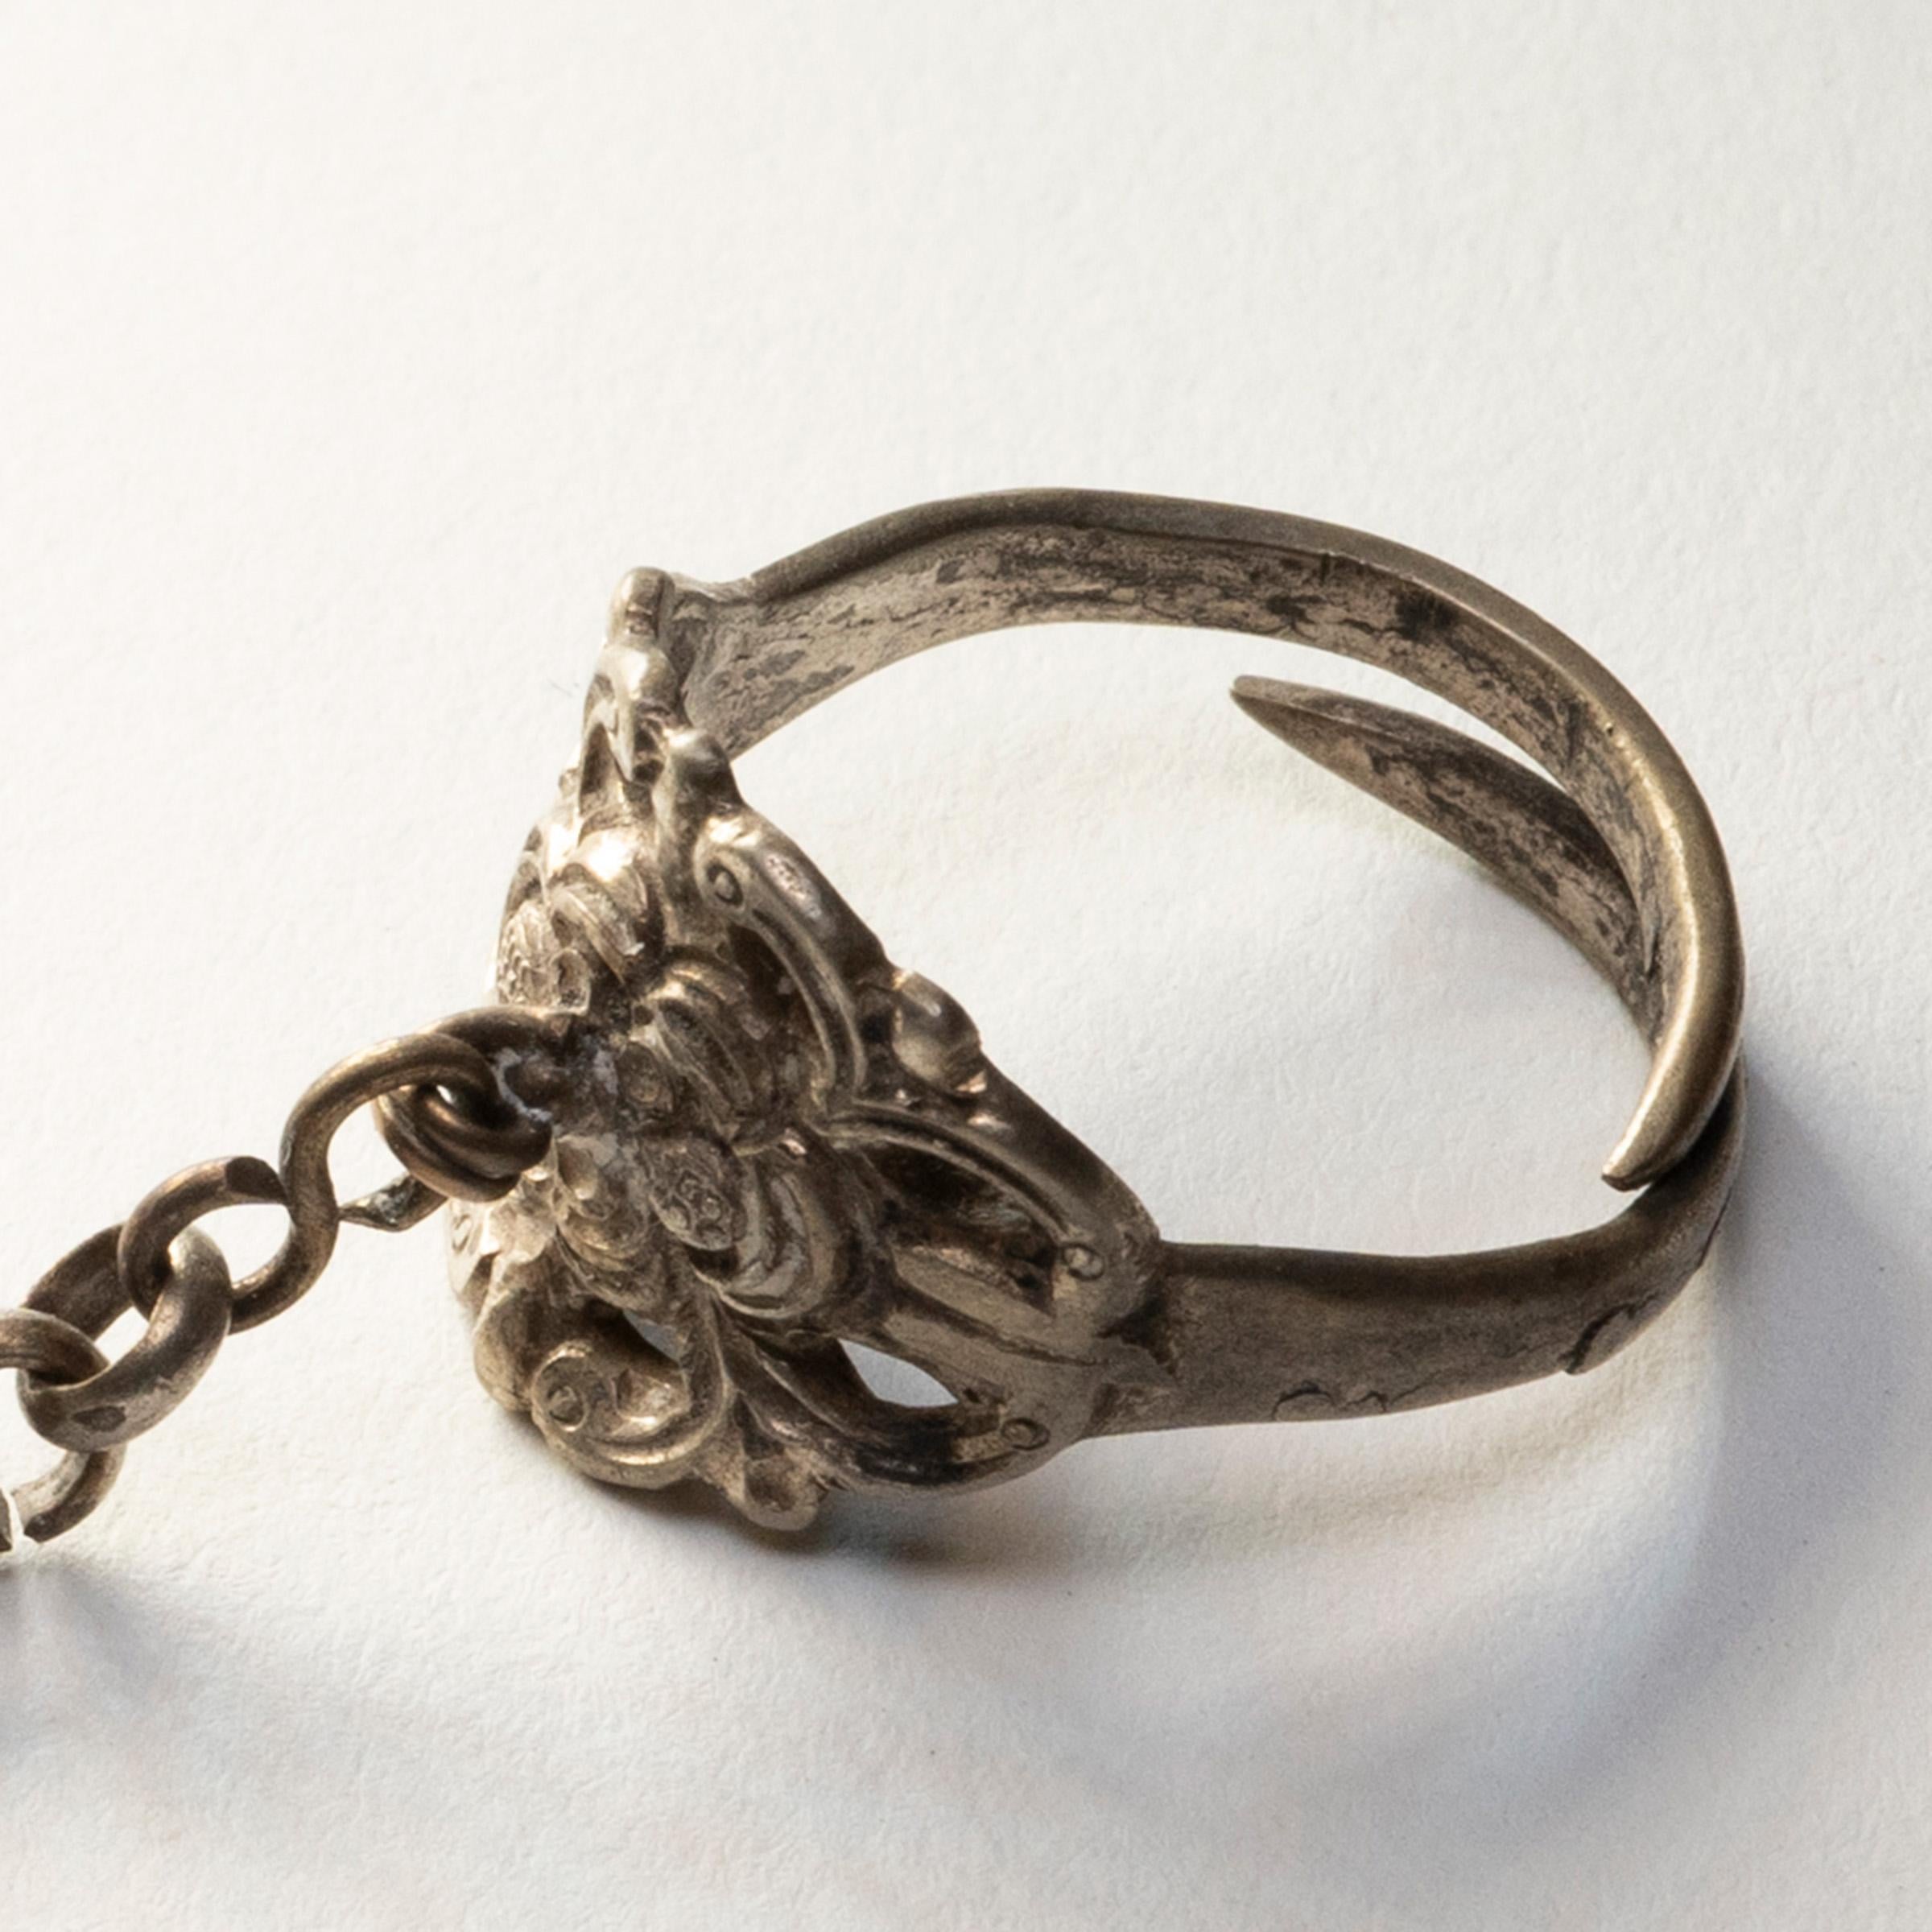 Dated to the late 19th century, this silver charm ring was believed to protect the wearer from bad luck and malevolent spirits. The ring is decorated in relief with a flower blossom surrounded by leaves and curling tendrils. A chain hangs from the